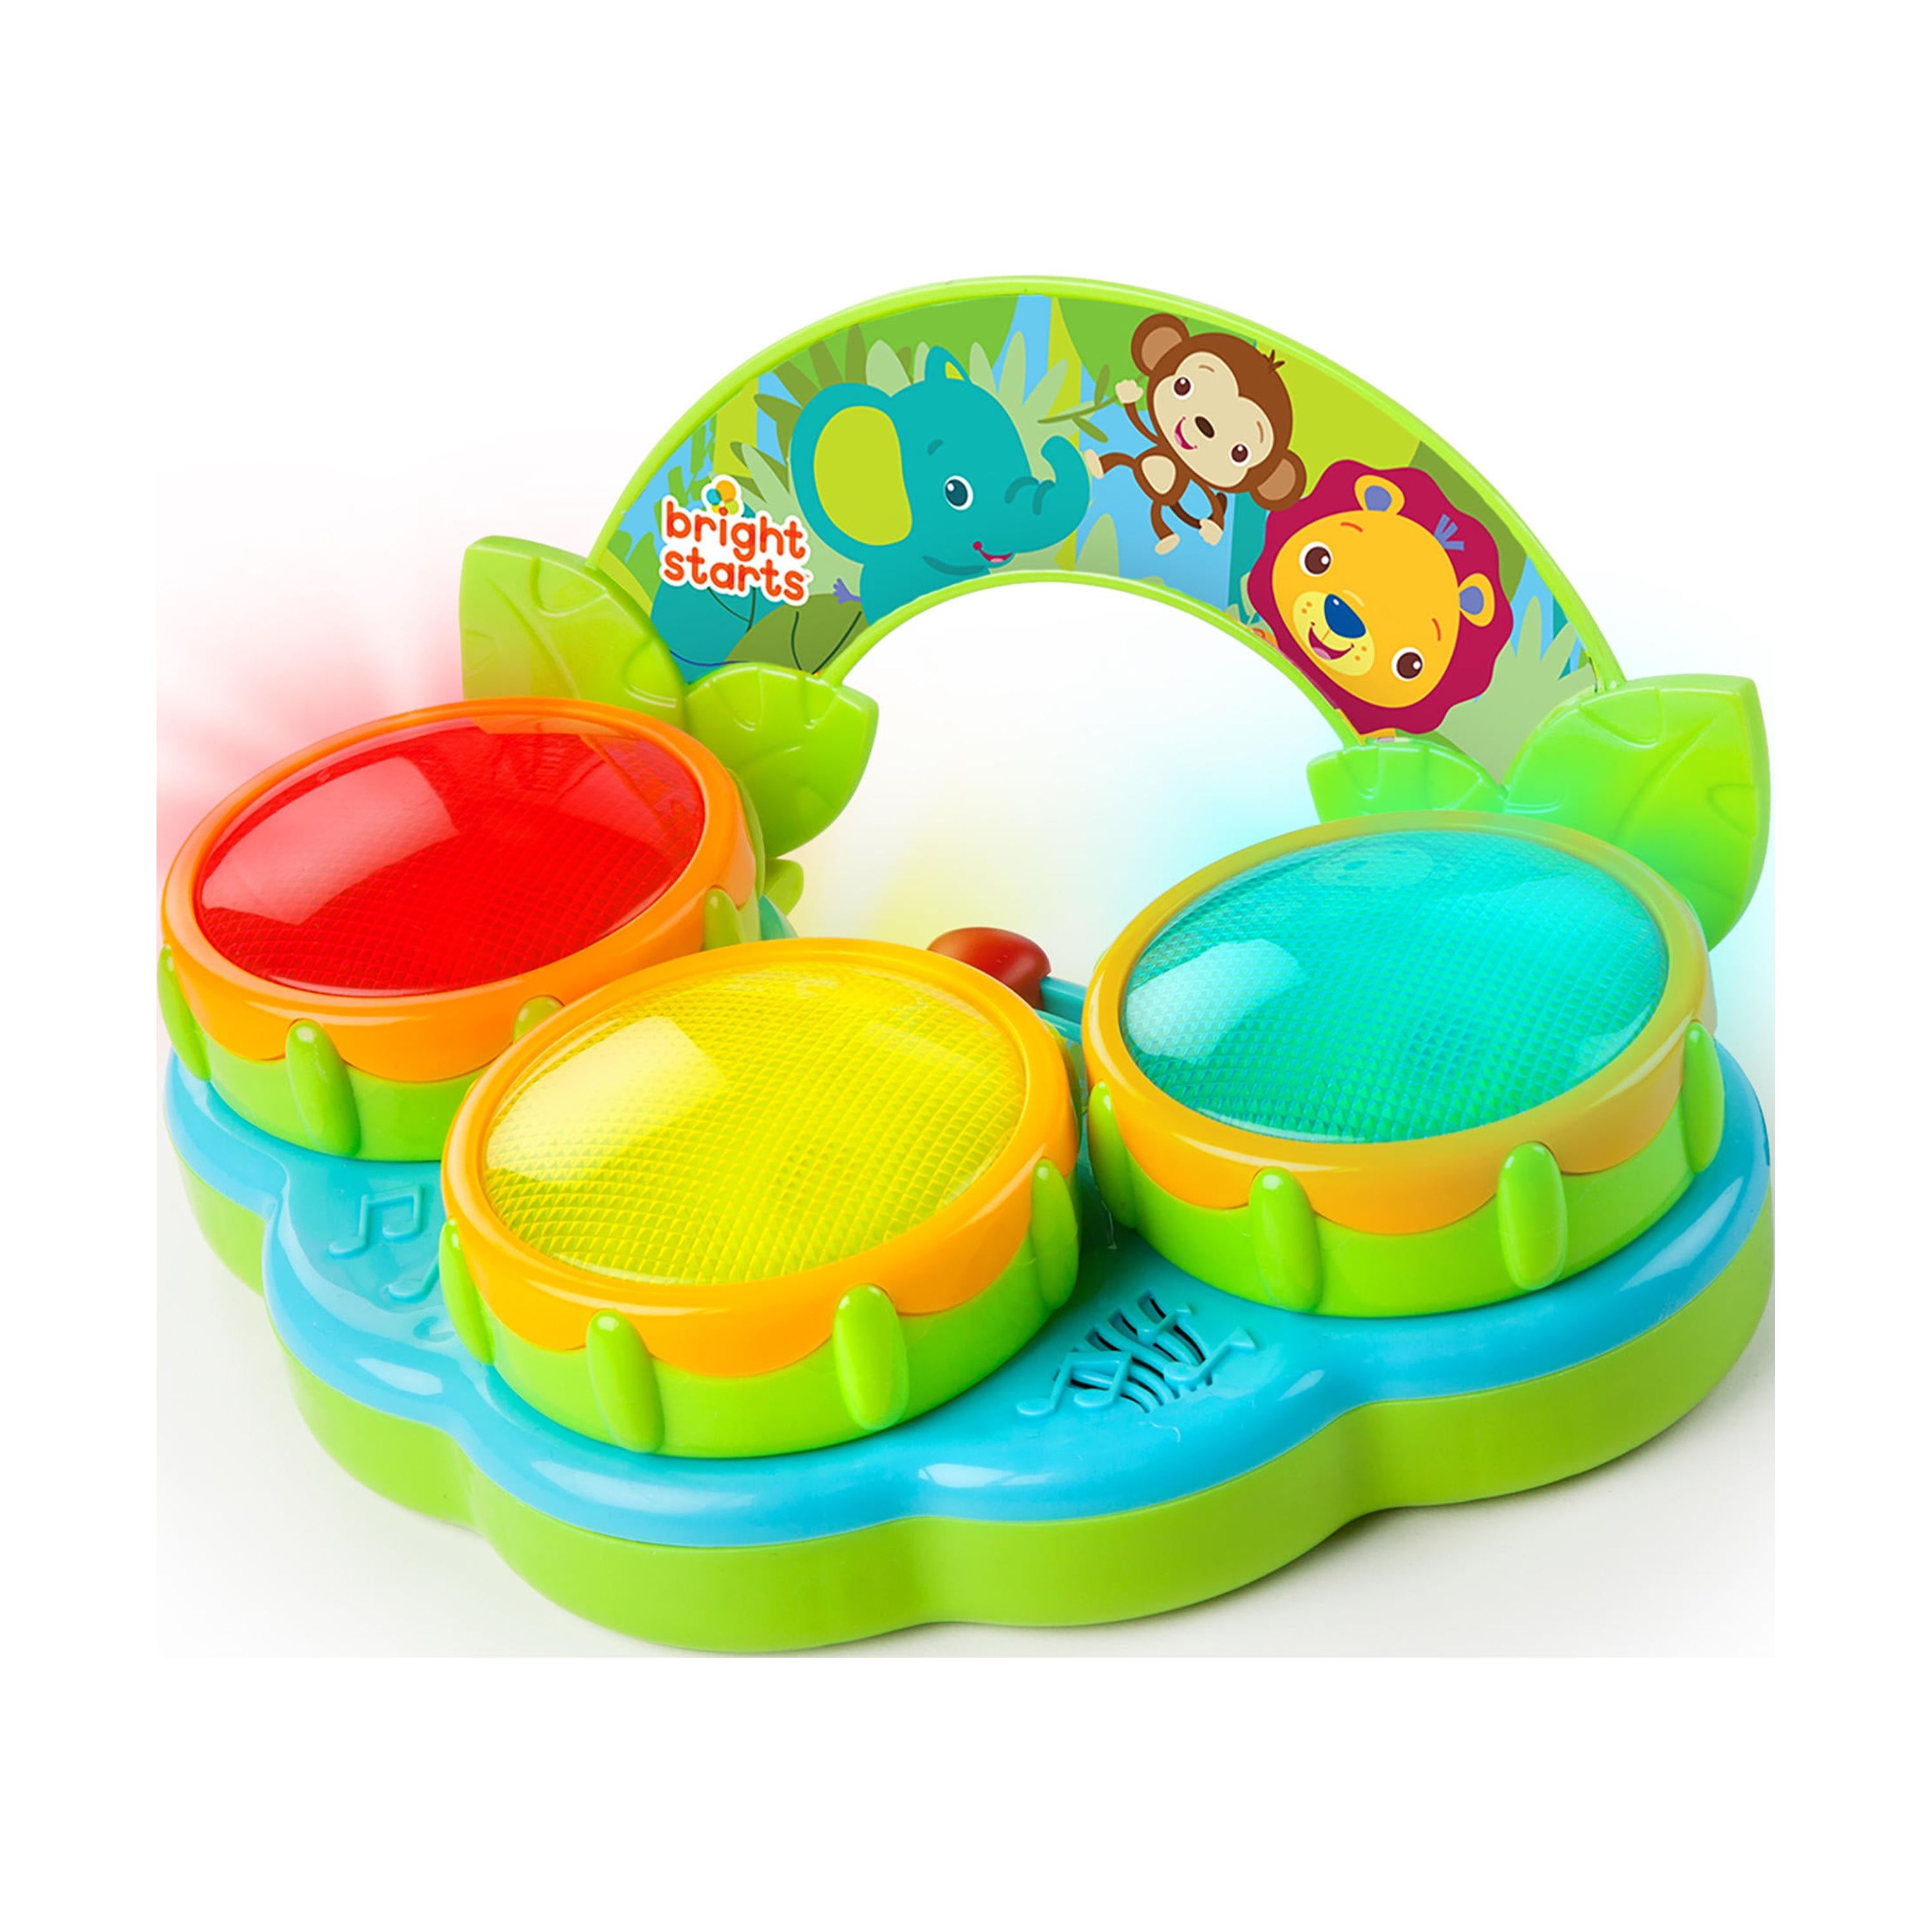 Bright Starts Safari Beats Musical Drum Toy with Lights, Ages 3 Months +, Infant and Toddler, Unisex - image 1 of 7